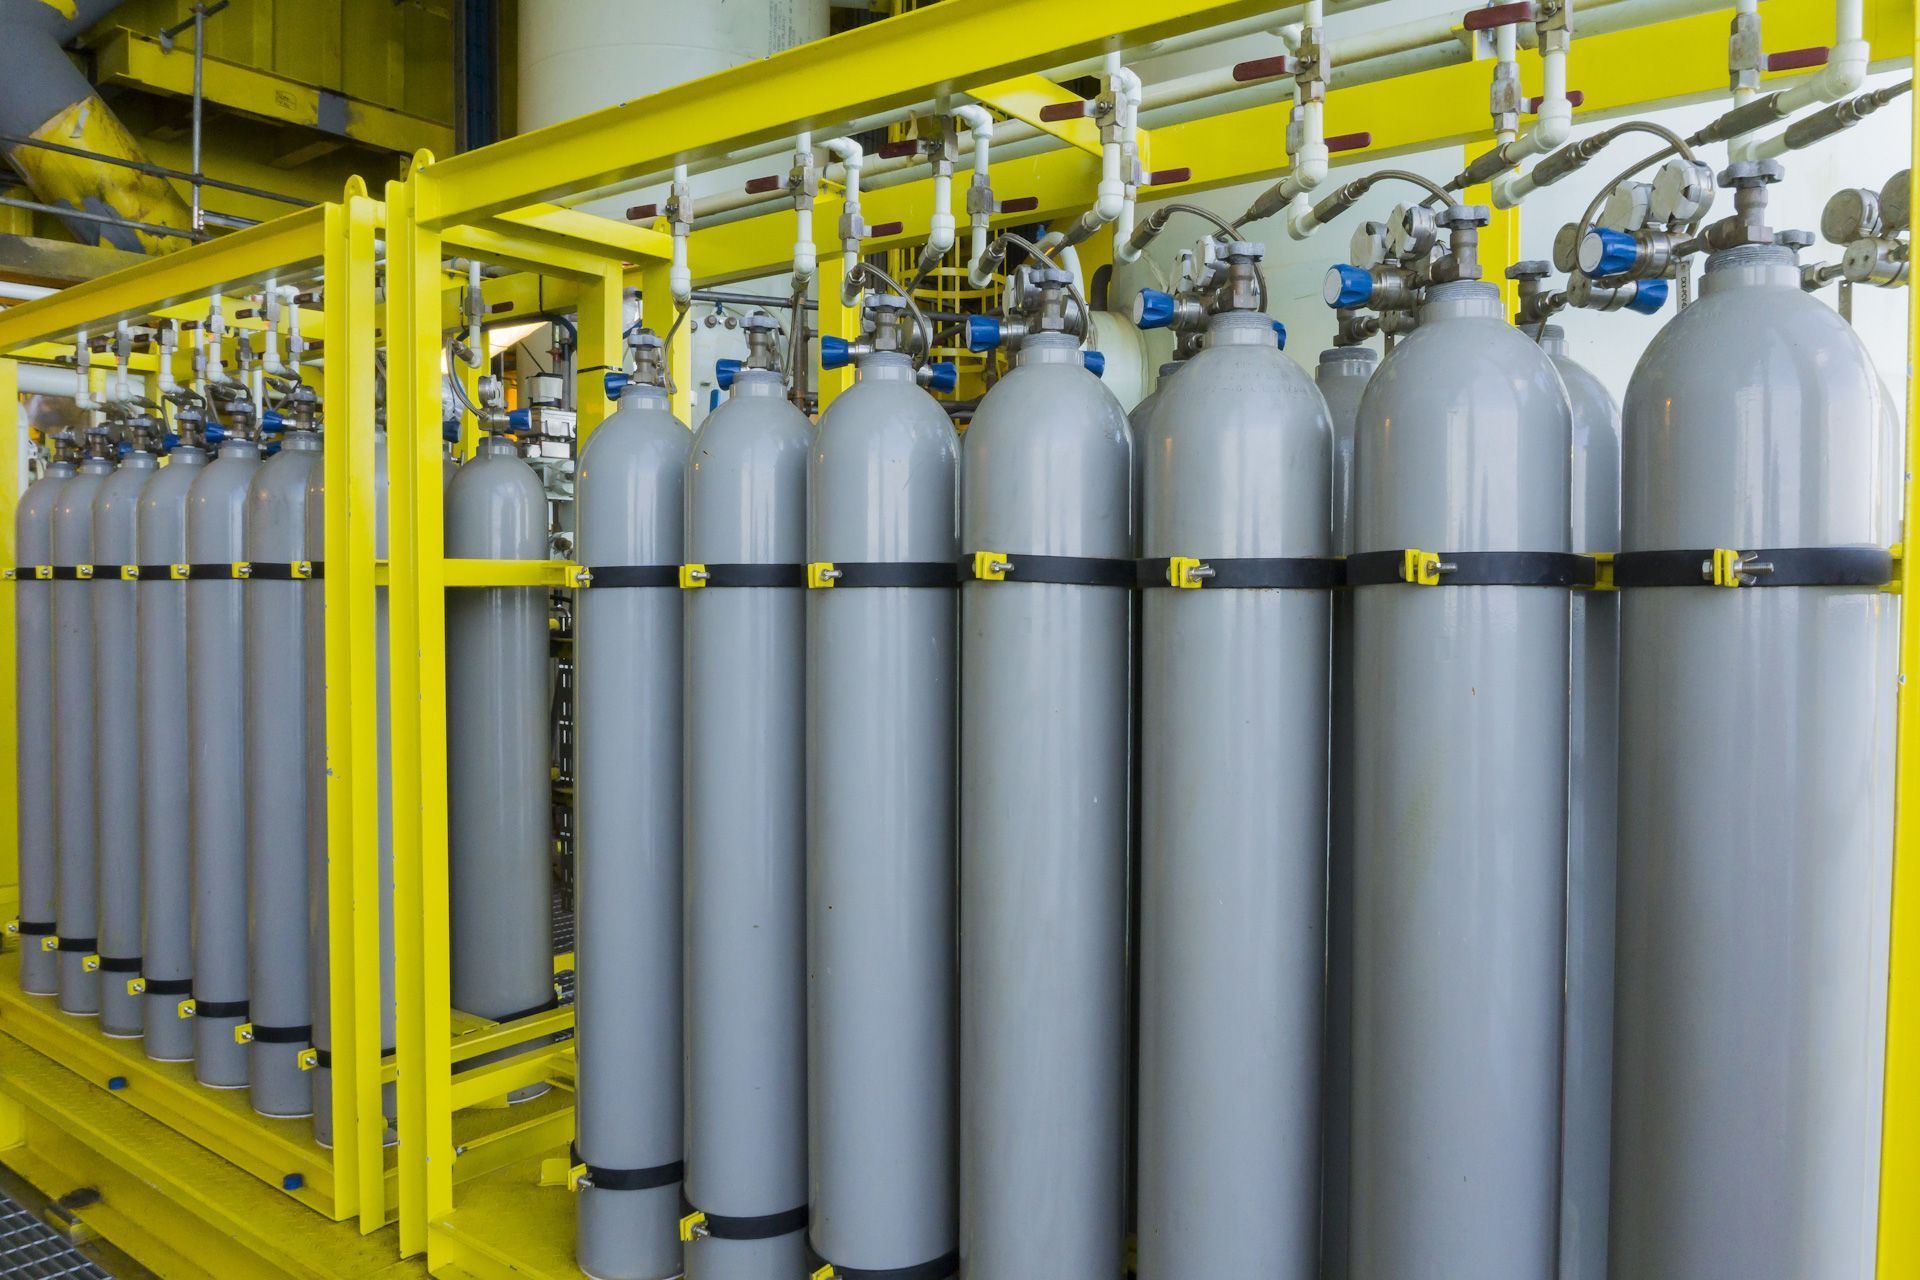 A row of gas cylinders are lined up in a warehouse